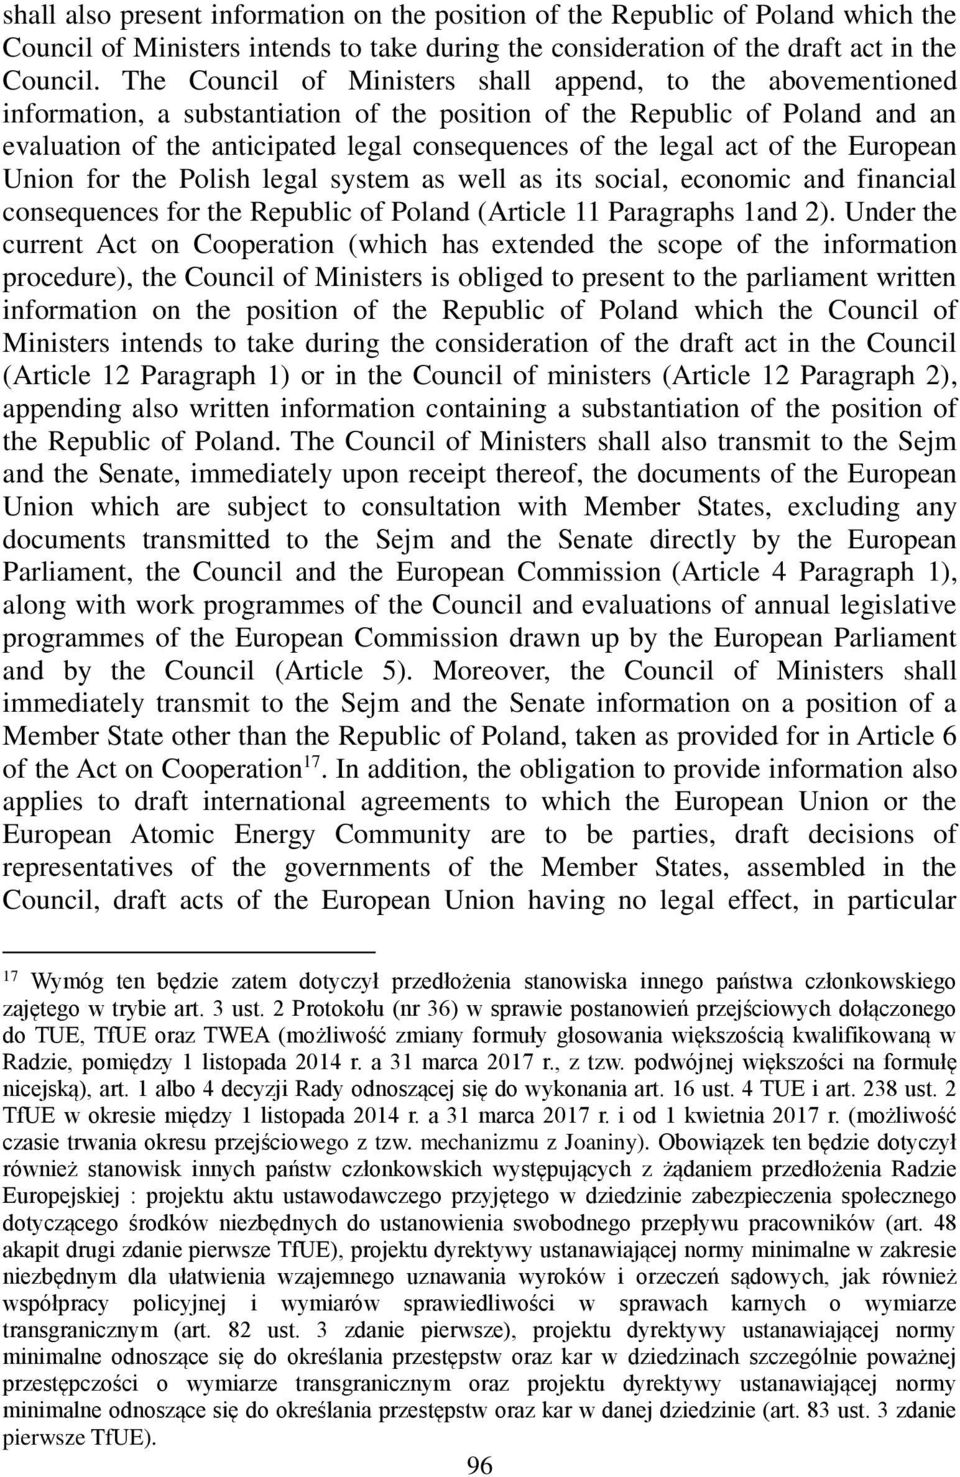 legal act of the European Union for the Polish legal system as well as its social, economic and financial consequences for the Republic of Poland (Article 11 Paragraphs 1and 2).